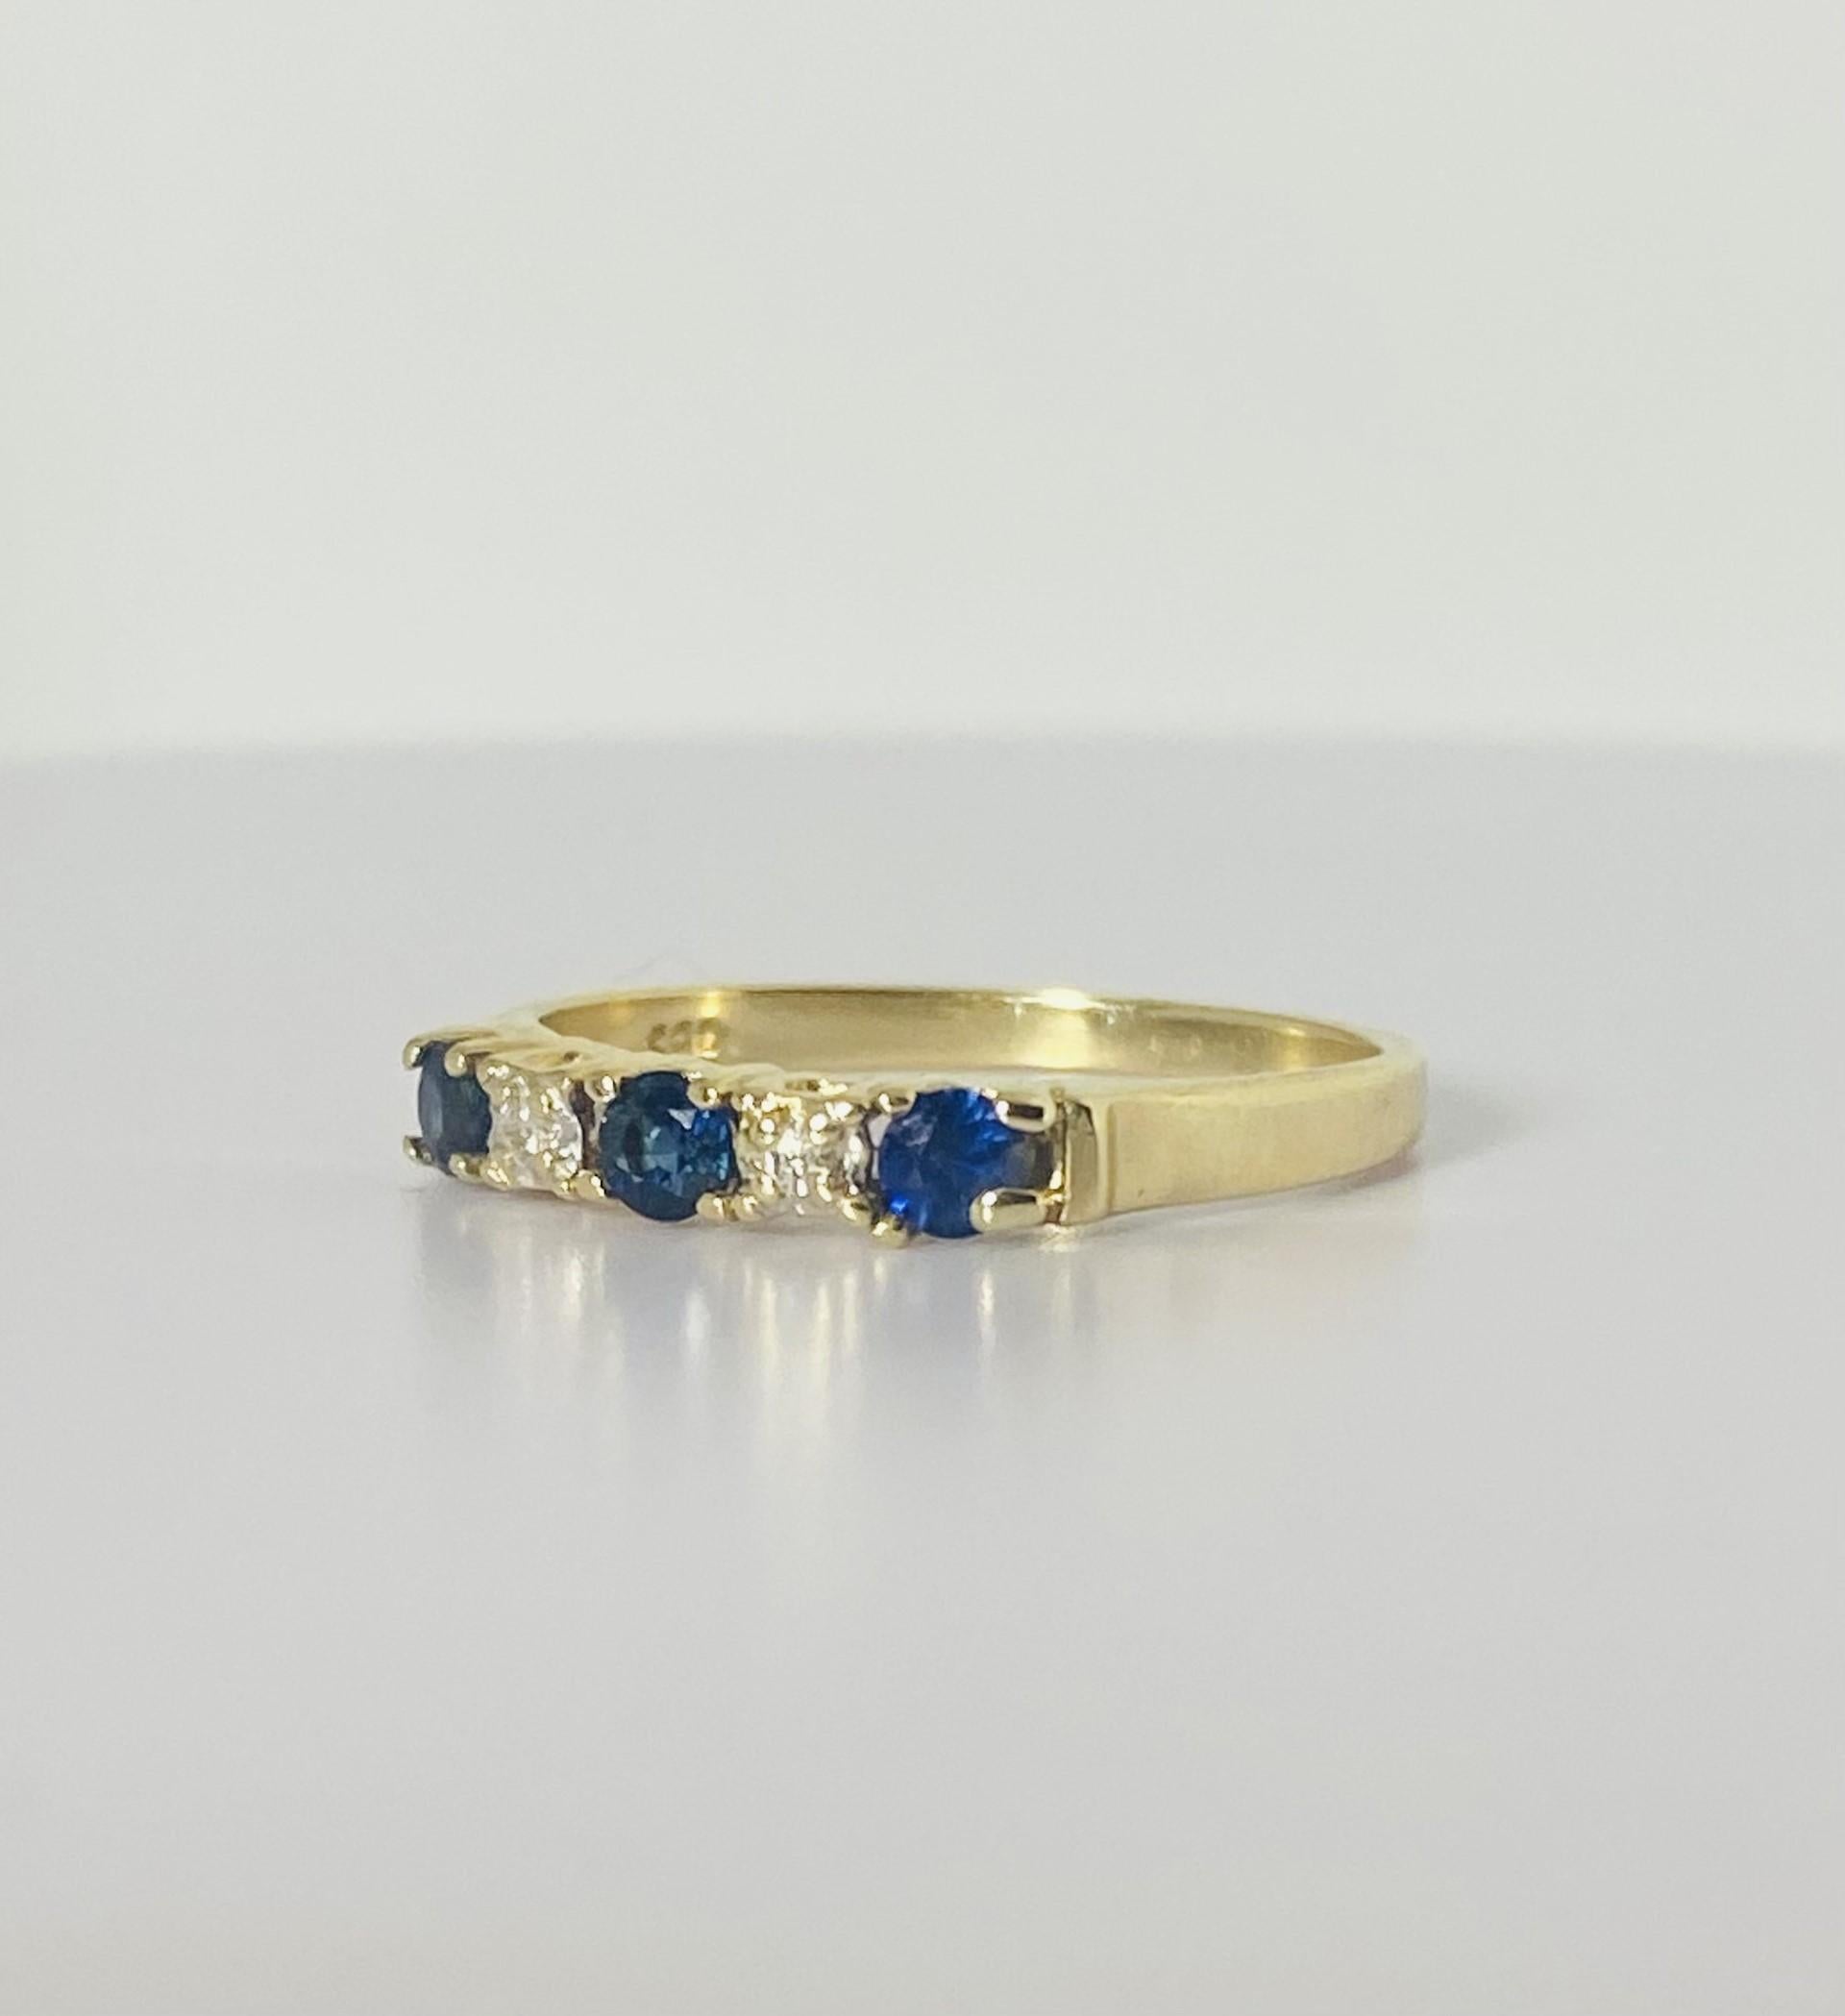 Vintage ring with blue sapphires & diamonds from the 1950S, 14 carat yellow gold In Good Condition For Sale In Heemstede, NL